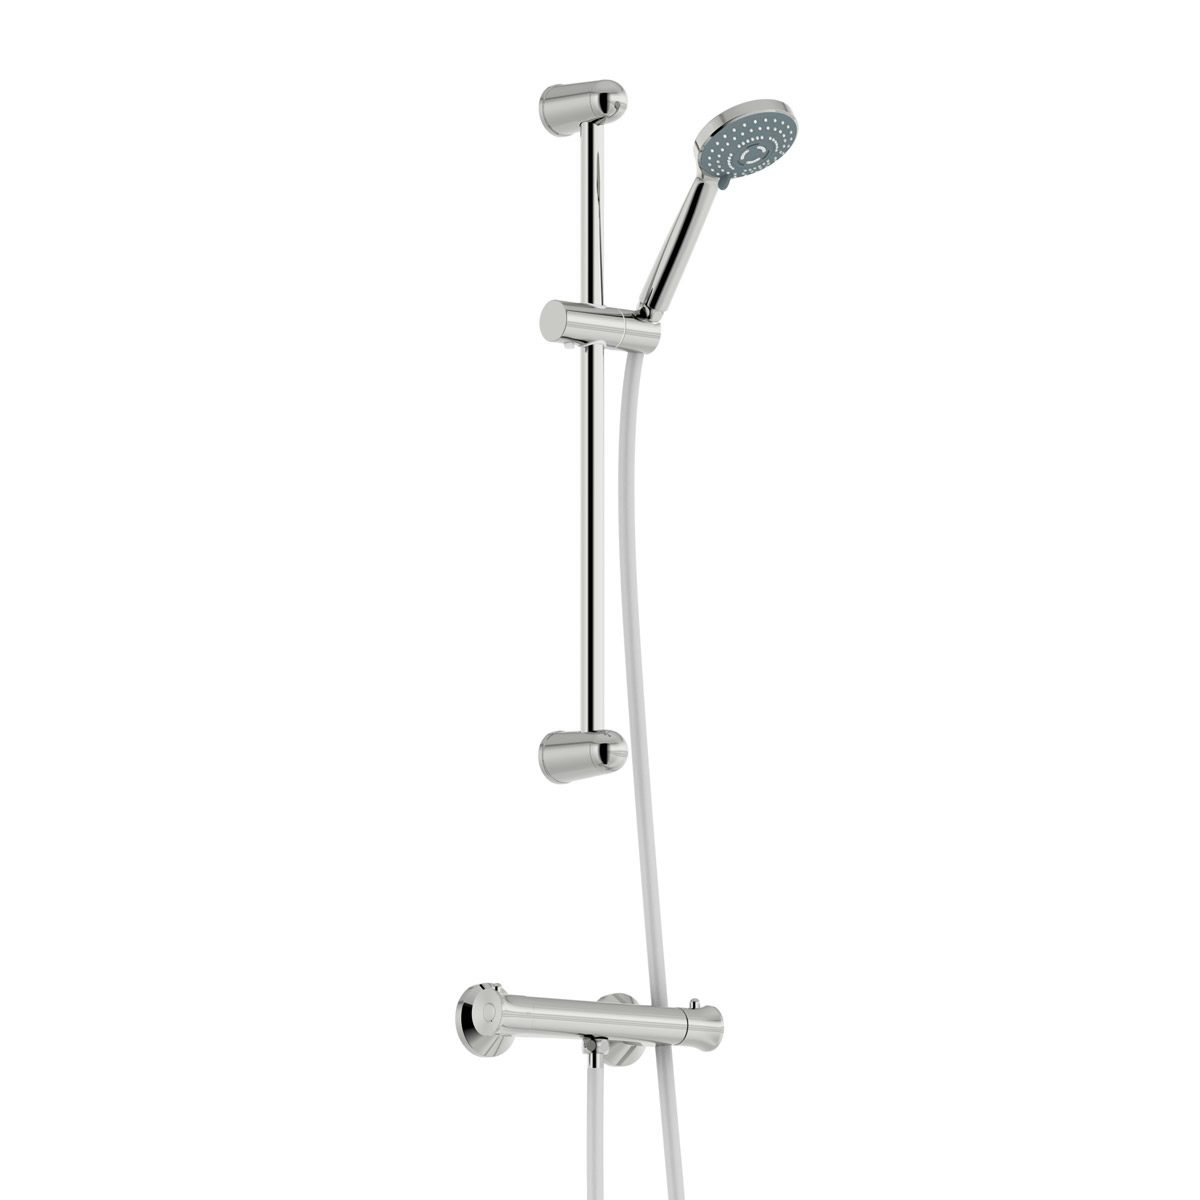 Clarity thermostatic slider rail mixer shower